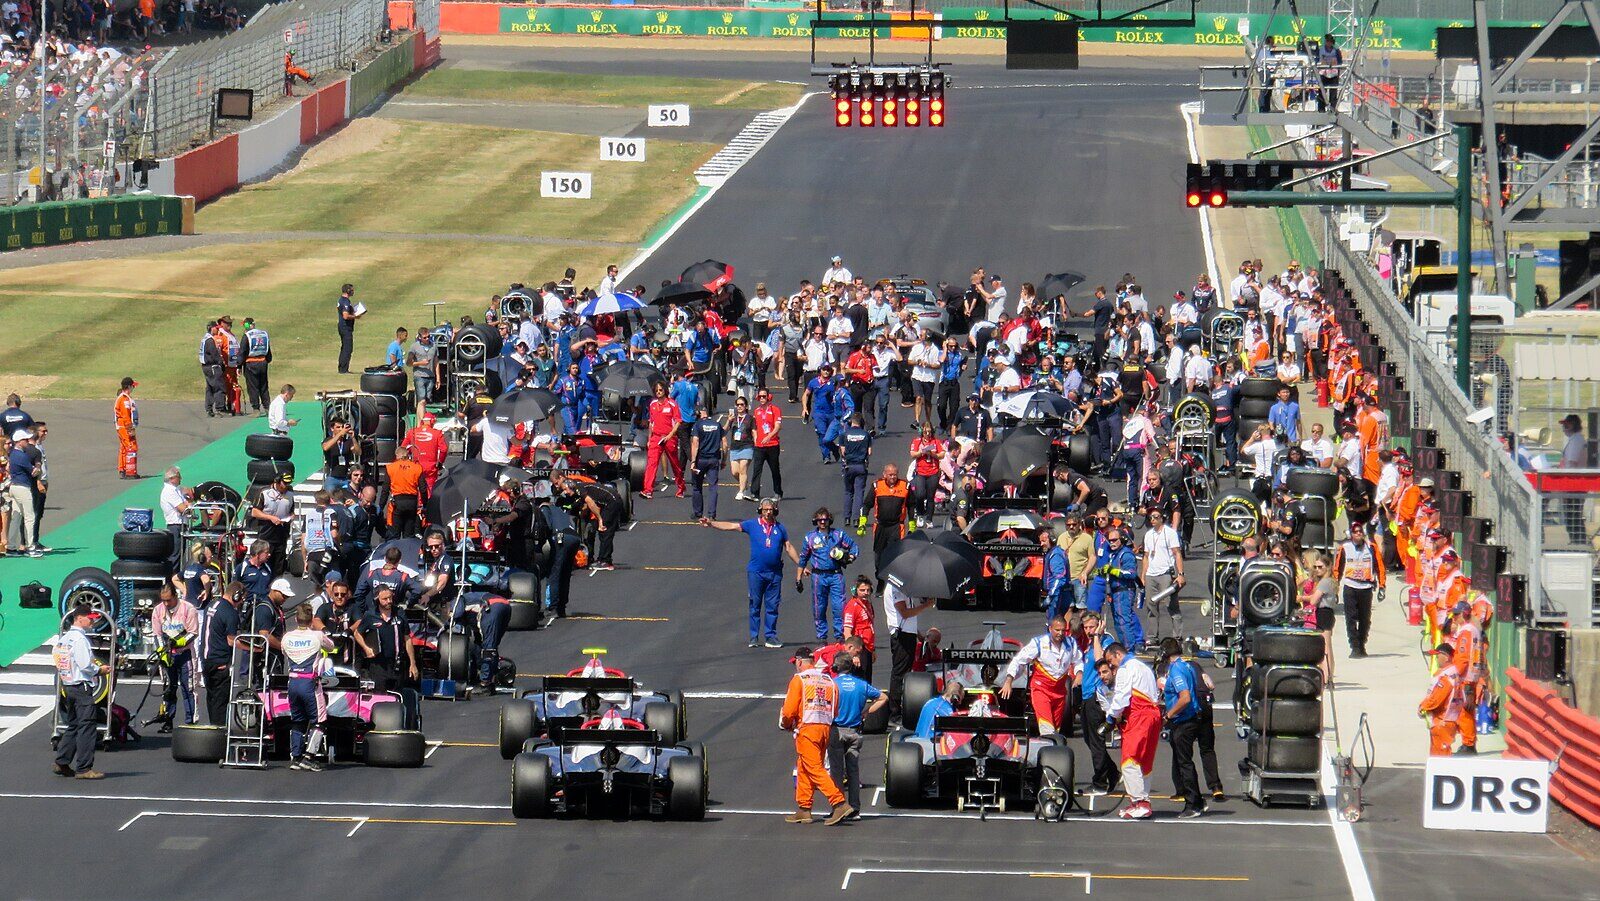 A photograph of the Formula 1 grid